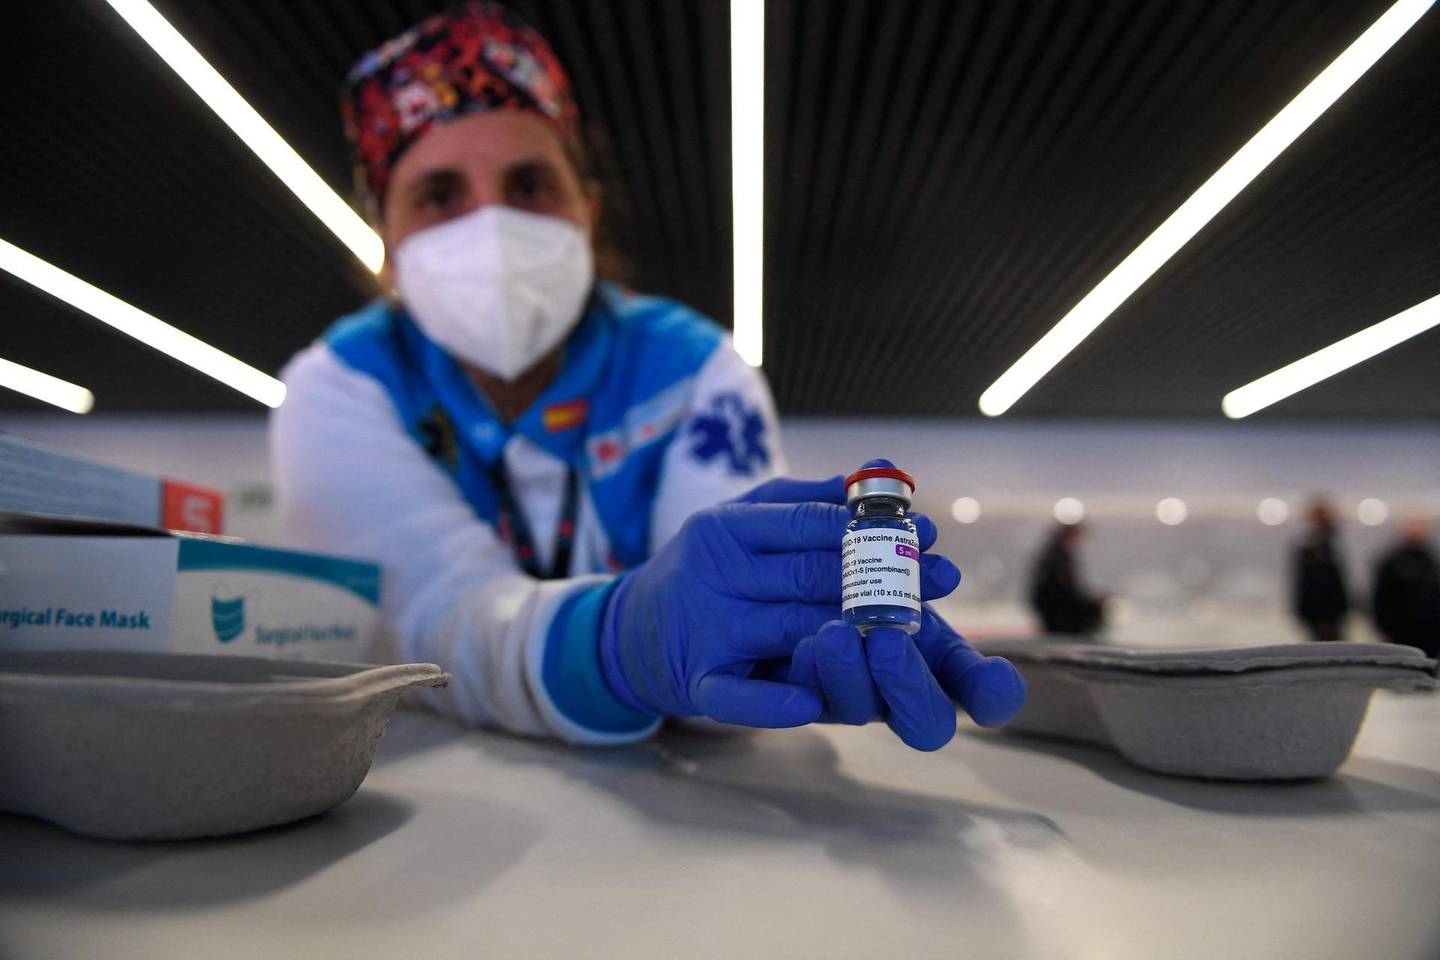 A health worker holds a bottle of the AstraZeneca vaccine against Covid-19 during a mass vaccination campaign by SUMMA 112 (Medical Emergency Services of Madrid) at the Wanda Metropolitan stadium in Madrid on February 25, 2021. So far, some 1.2 million people have been vaccinated in Spain since the start of the immunisation campaign which began just after Christmas with care home residents first in line along with their carers.  / AFP / PIERRE-PHILIPPE MARCOU
